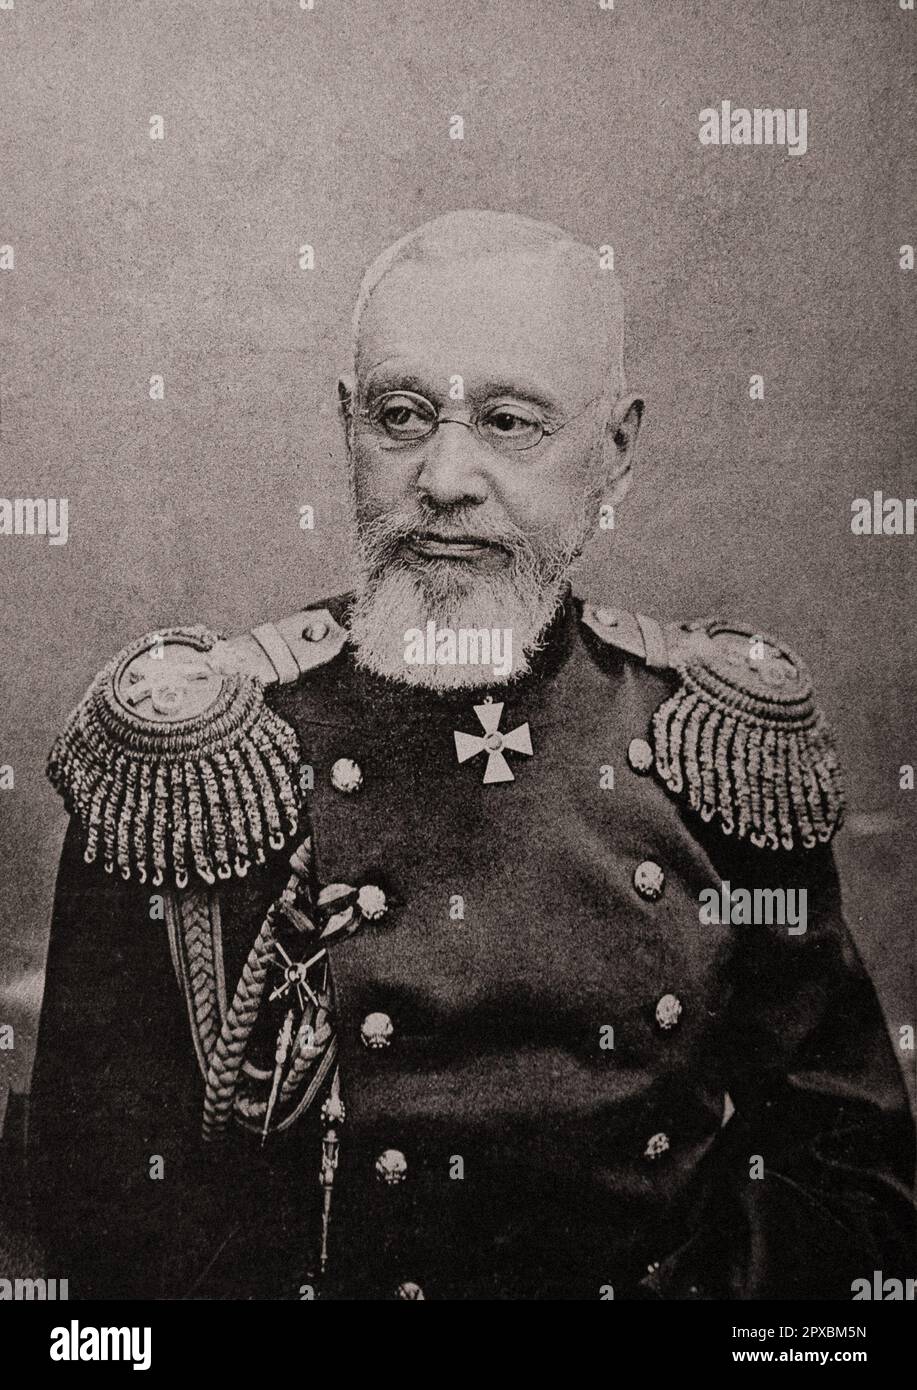 Minister of War Pyotr Vannovsky Minister of War and General Aide-de-camp to HM the Emperor, head of military administrations. Pyotr Semyonovich Vannovsky (1822–1904) was a Russian statesman and military leader of Belarusian extraction, who served in the Imperial Russian Army. He was also an honorary member of the Academy of Military Medical, the Mikhailovsky Artillery School, the Mykolaiv Engineering School, the Imperial Academy of Sciences, and a full knight of the Order of St. Vladimir. Stock Photo